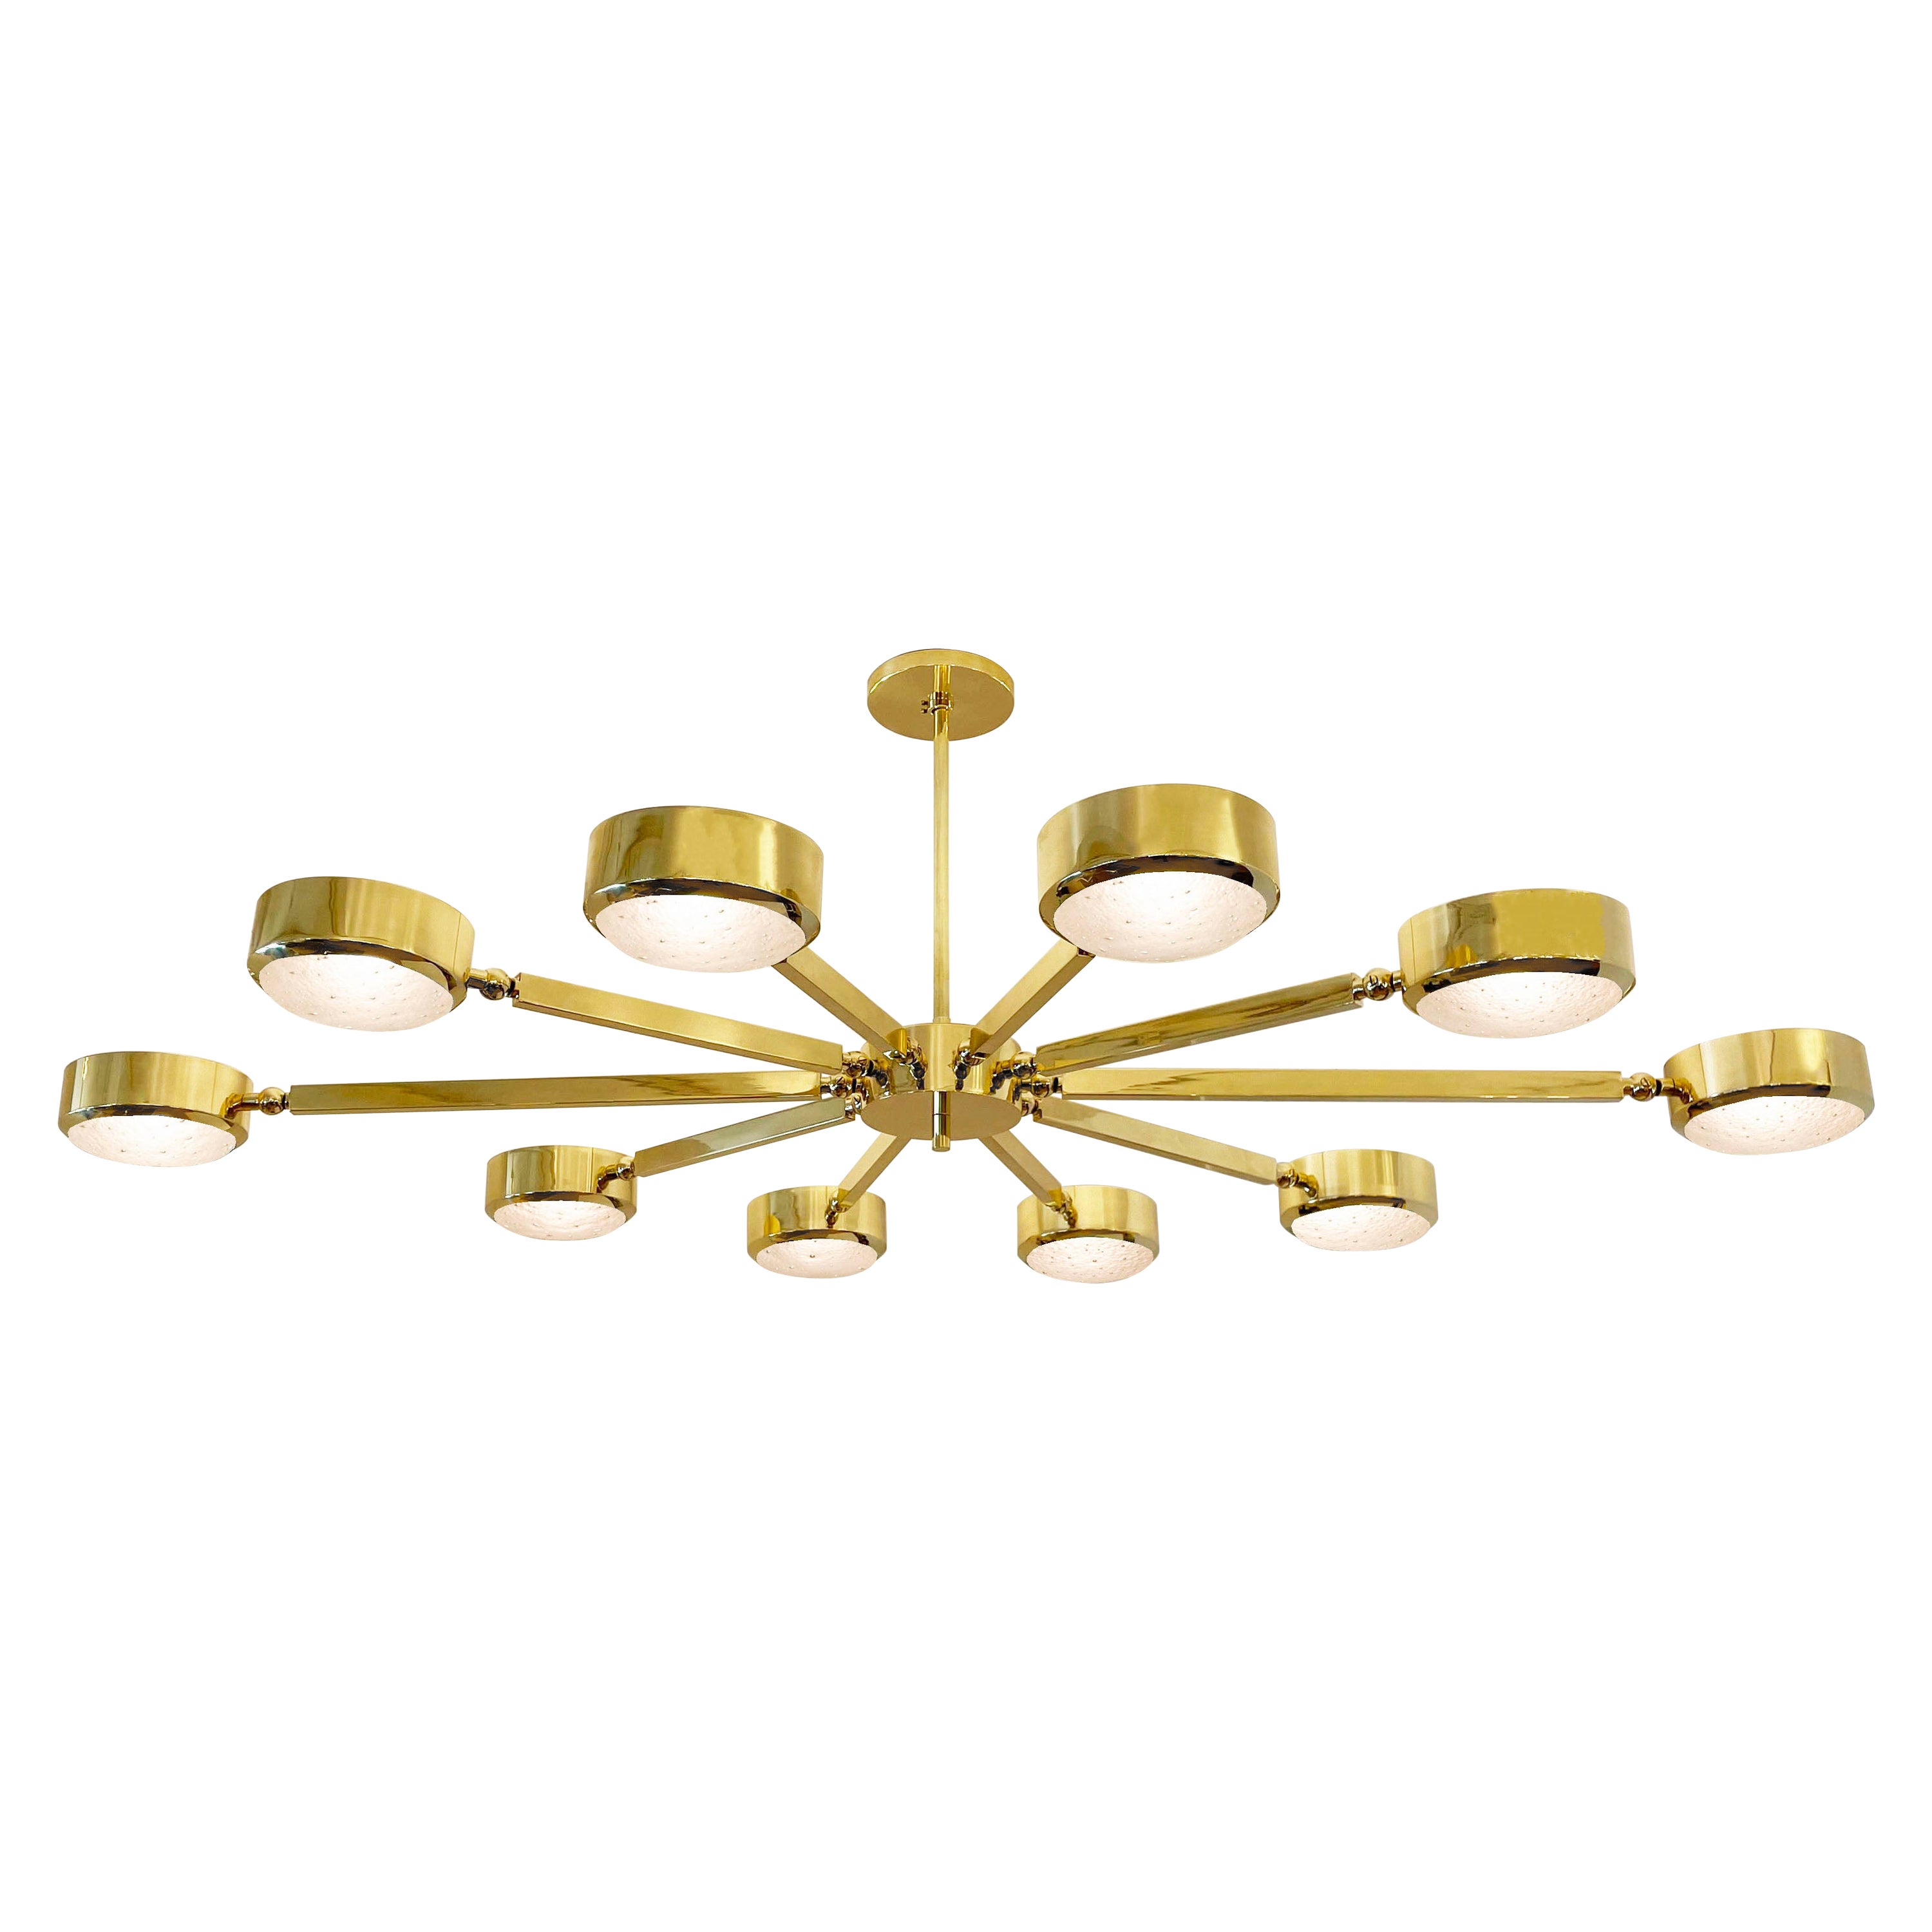 Oval Oculus Articulating Ceiling Light by Gaspare Asaro -Murano Glass For Sale